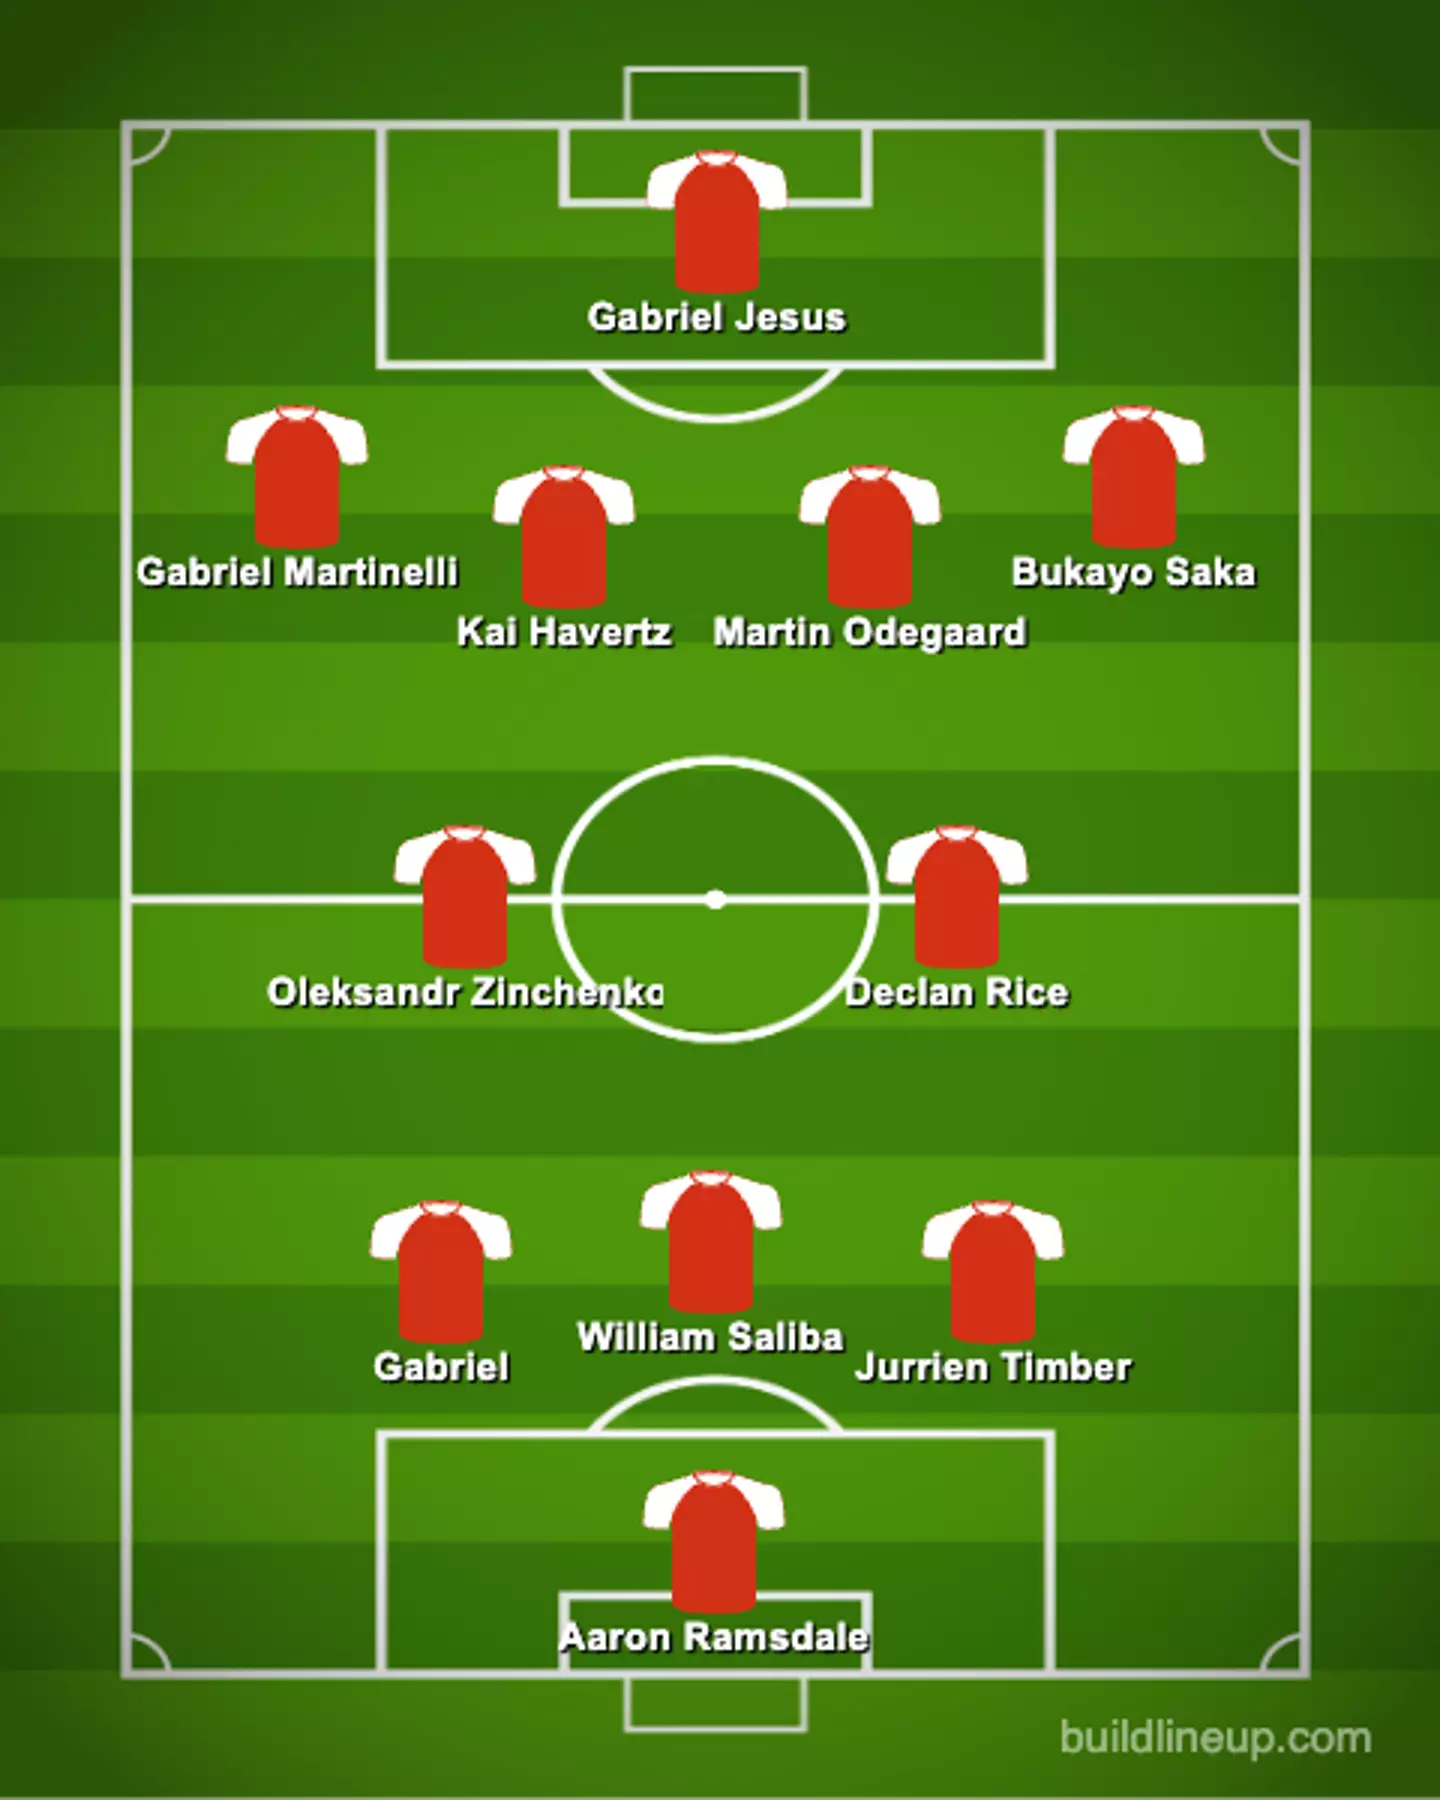 Arsenal could go with a different formation instead